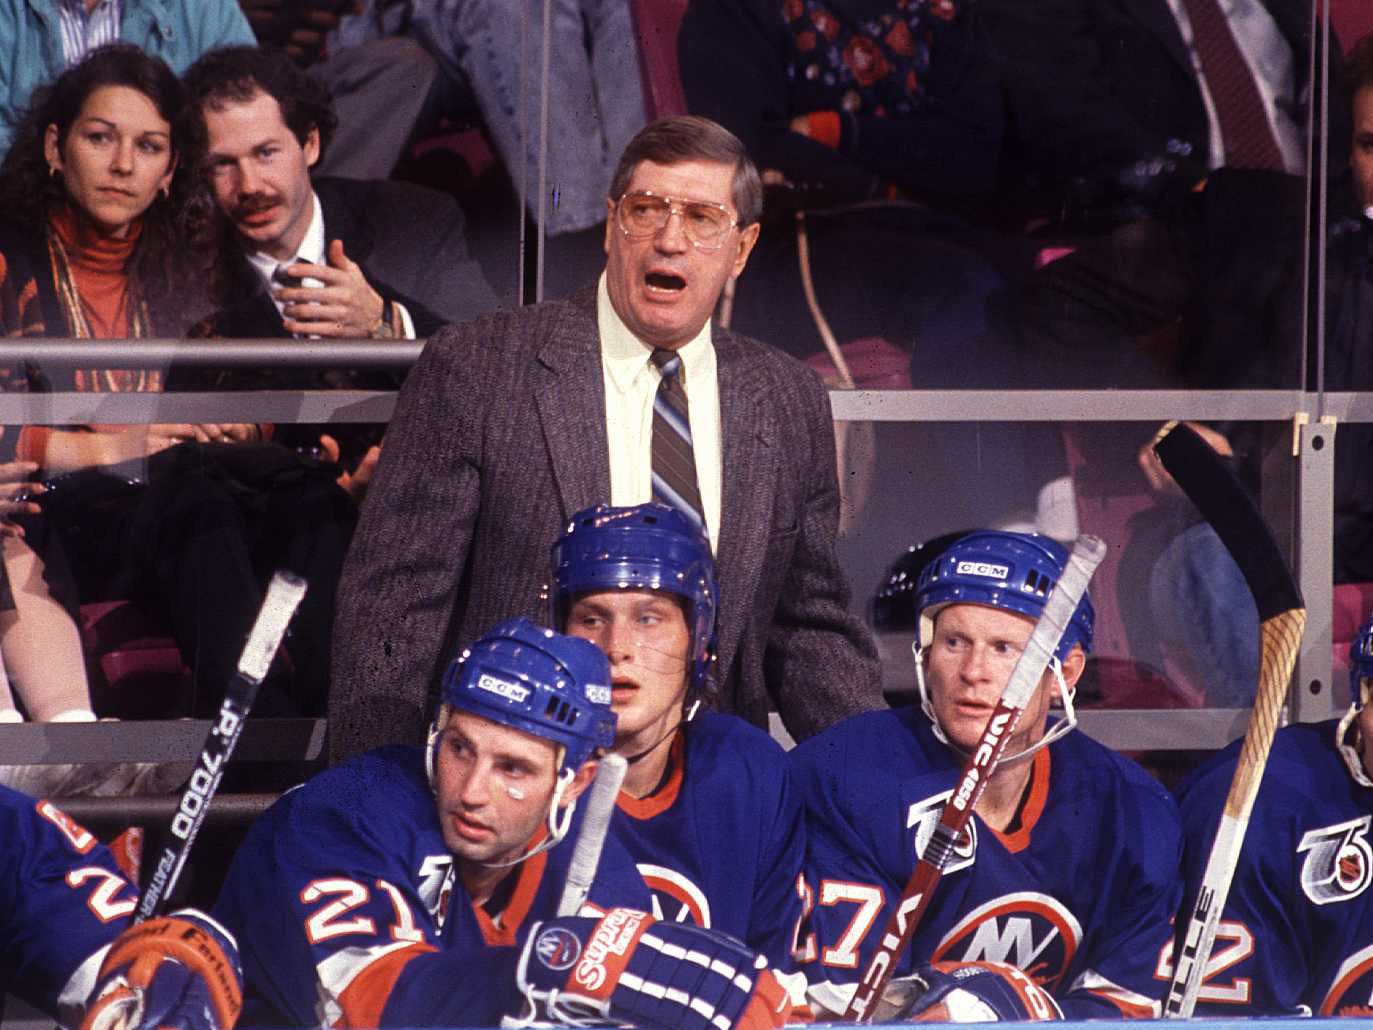 Al Arbour, Coach of Islanders' 1980s Dynasty, Dies at 82 - The New York  Times